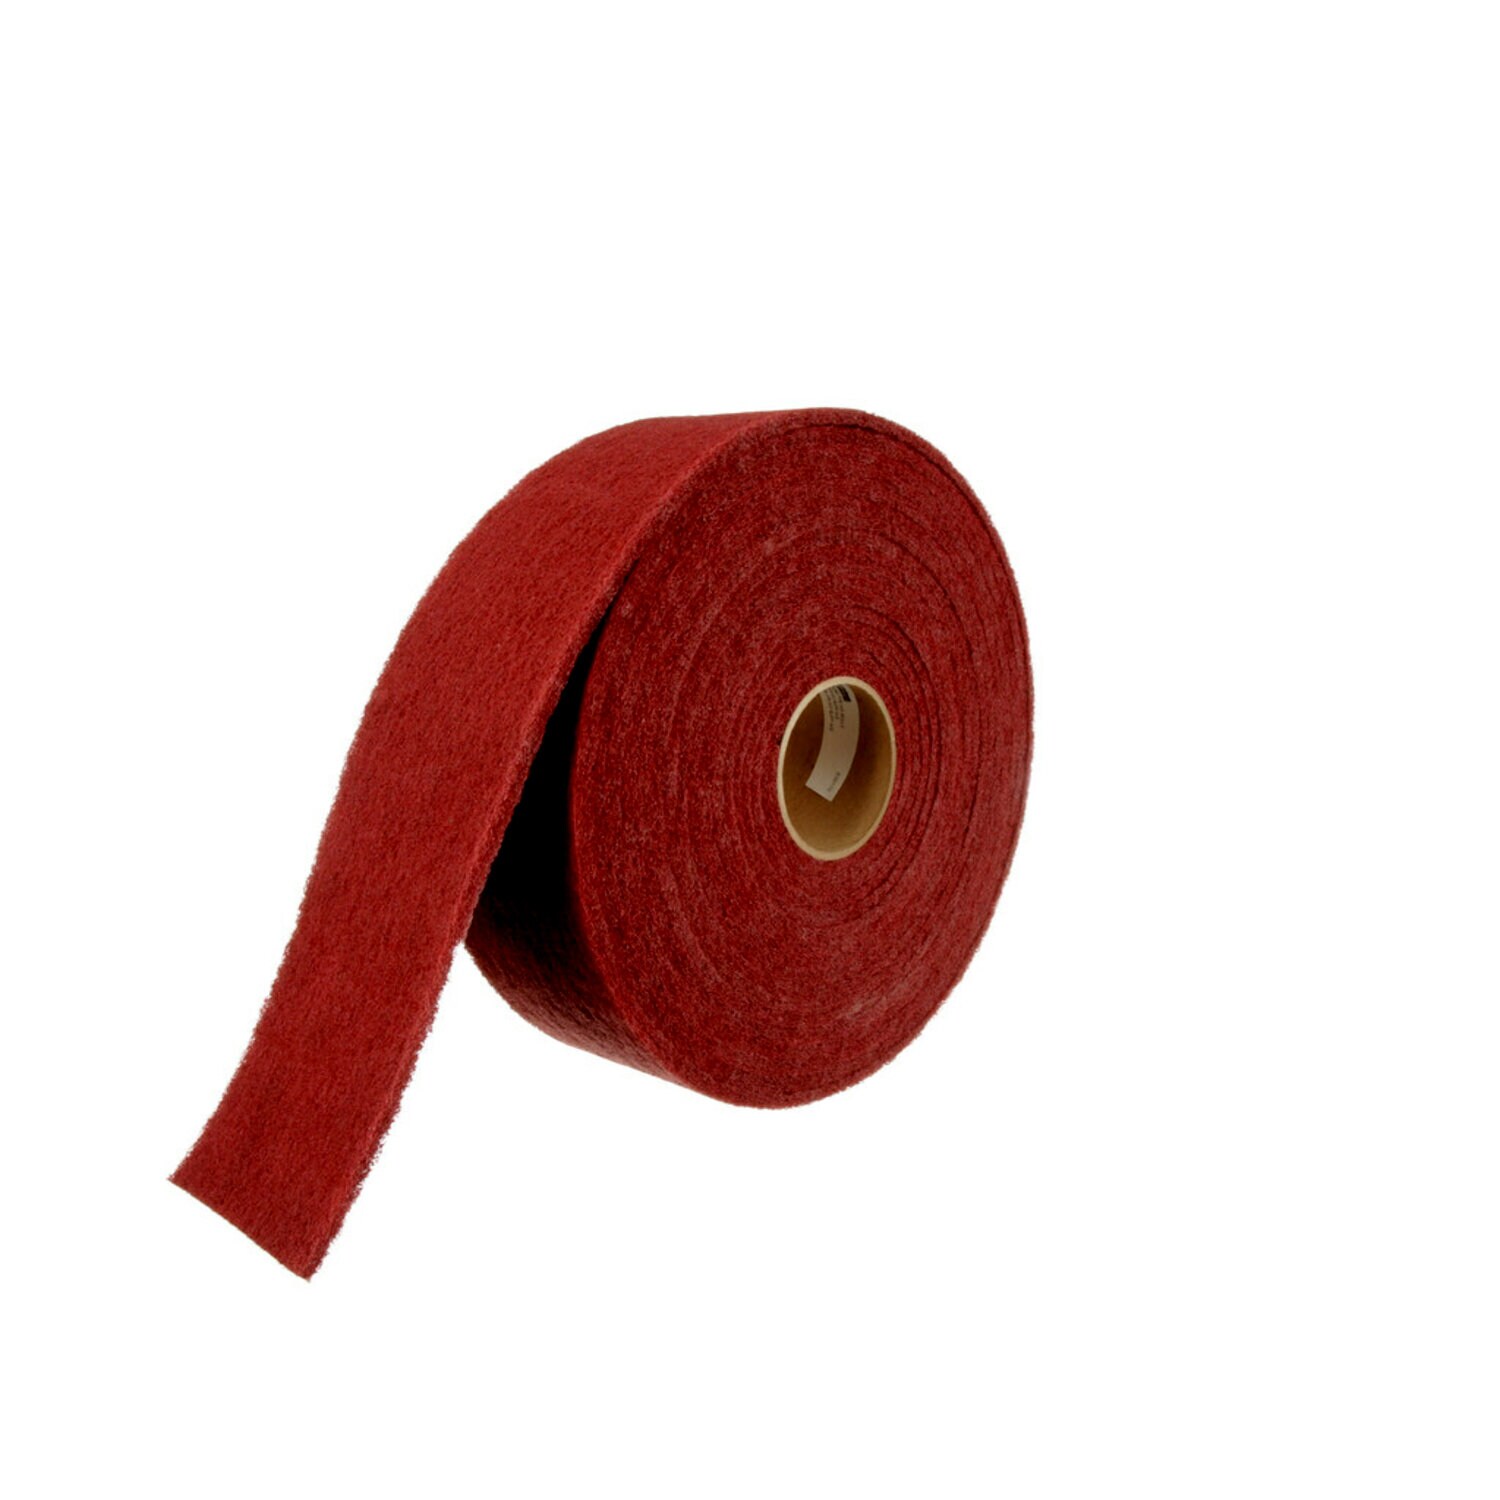 7000046840 - Standard Abrasives Aluminum Oxide Buff and Blend HS Roll, 830170, Very
Fine, 4 in x 30 ft, 3 ea/Case